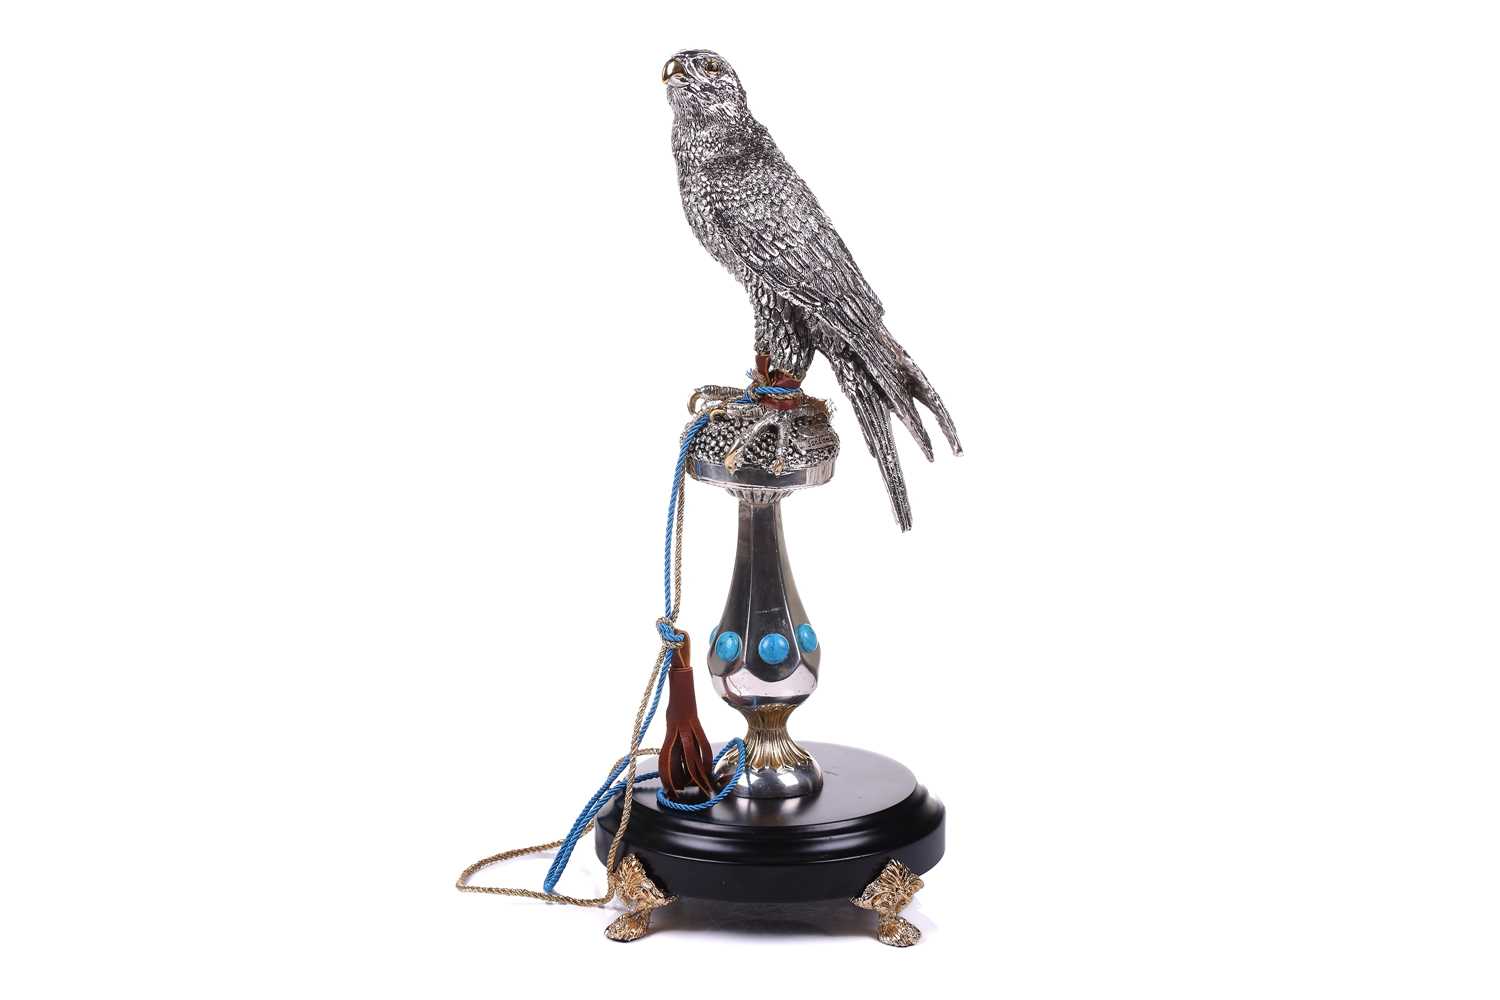 Lorenzo Sandomar, a large model of a silver and gold plated falcon, marked 925, standing on a